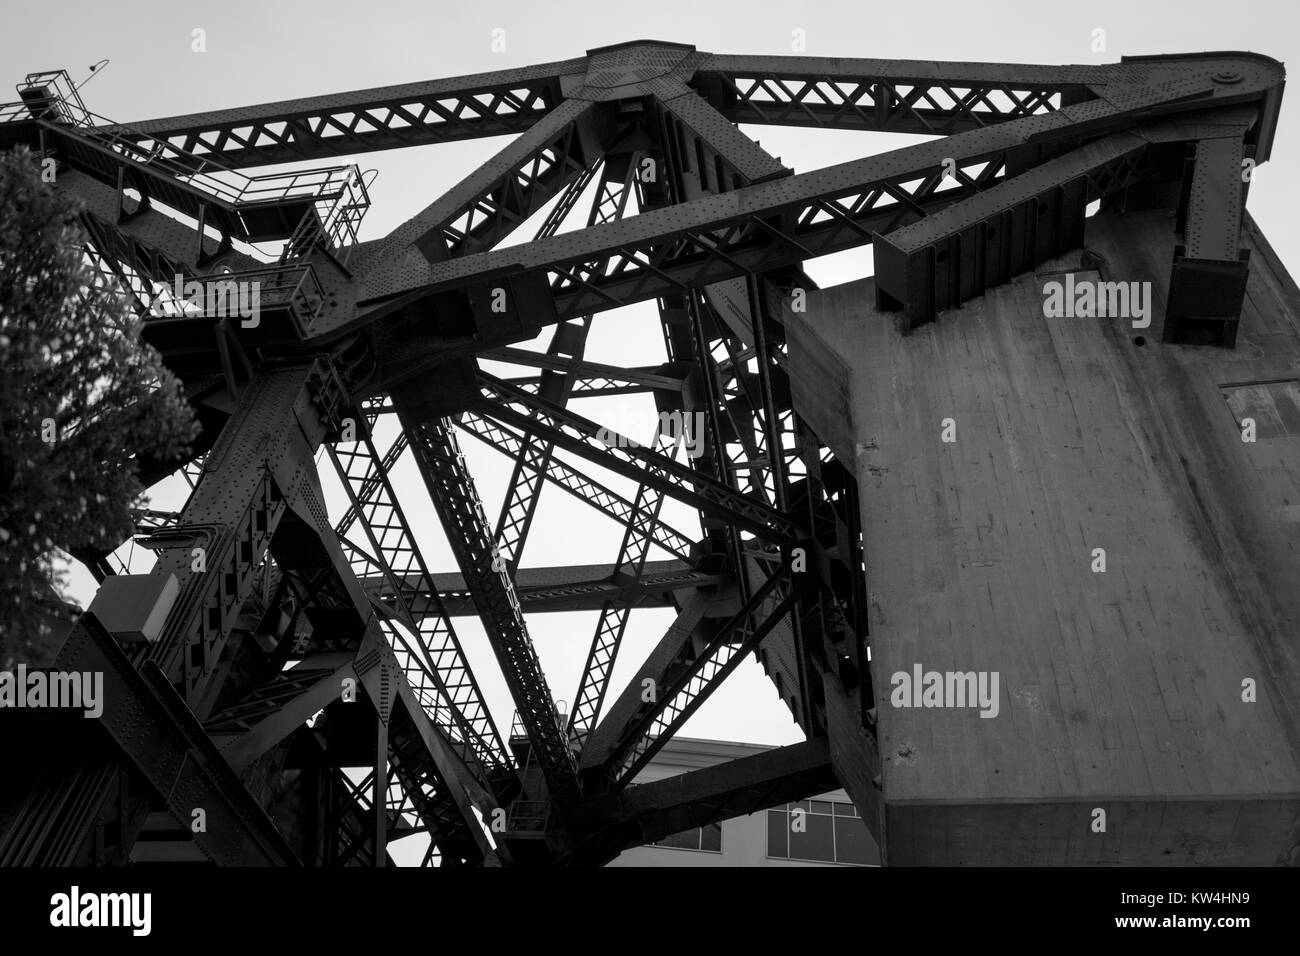 Counterweight and metal braces for the historic 3rd Street bridge, originally built in 1933, in the China Basin neighborhood of San Francisco, California, August 21, 2016. Stock Photo